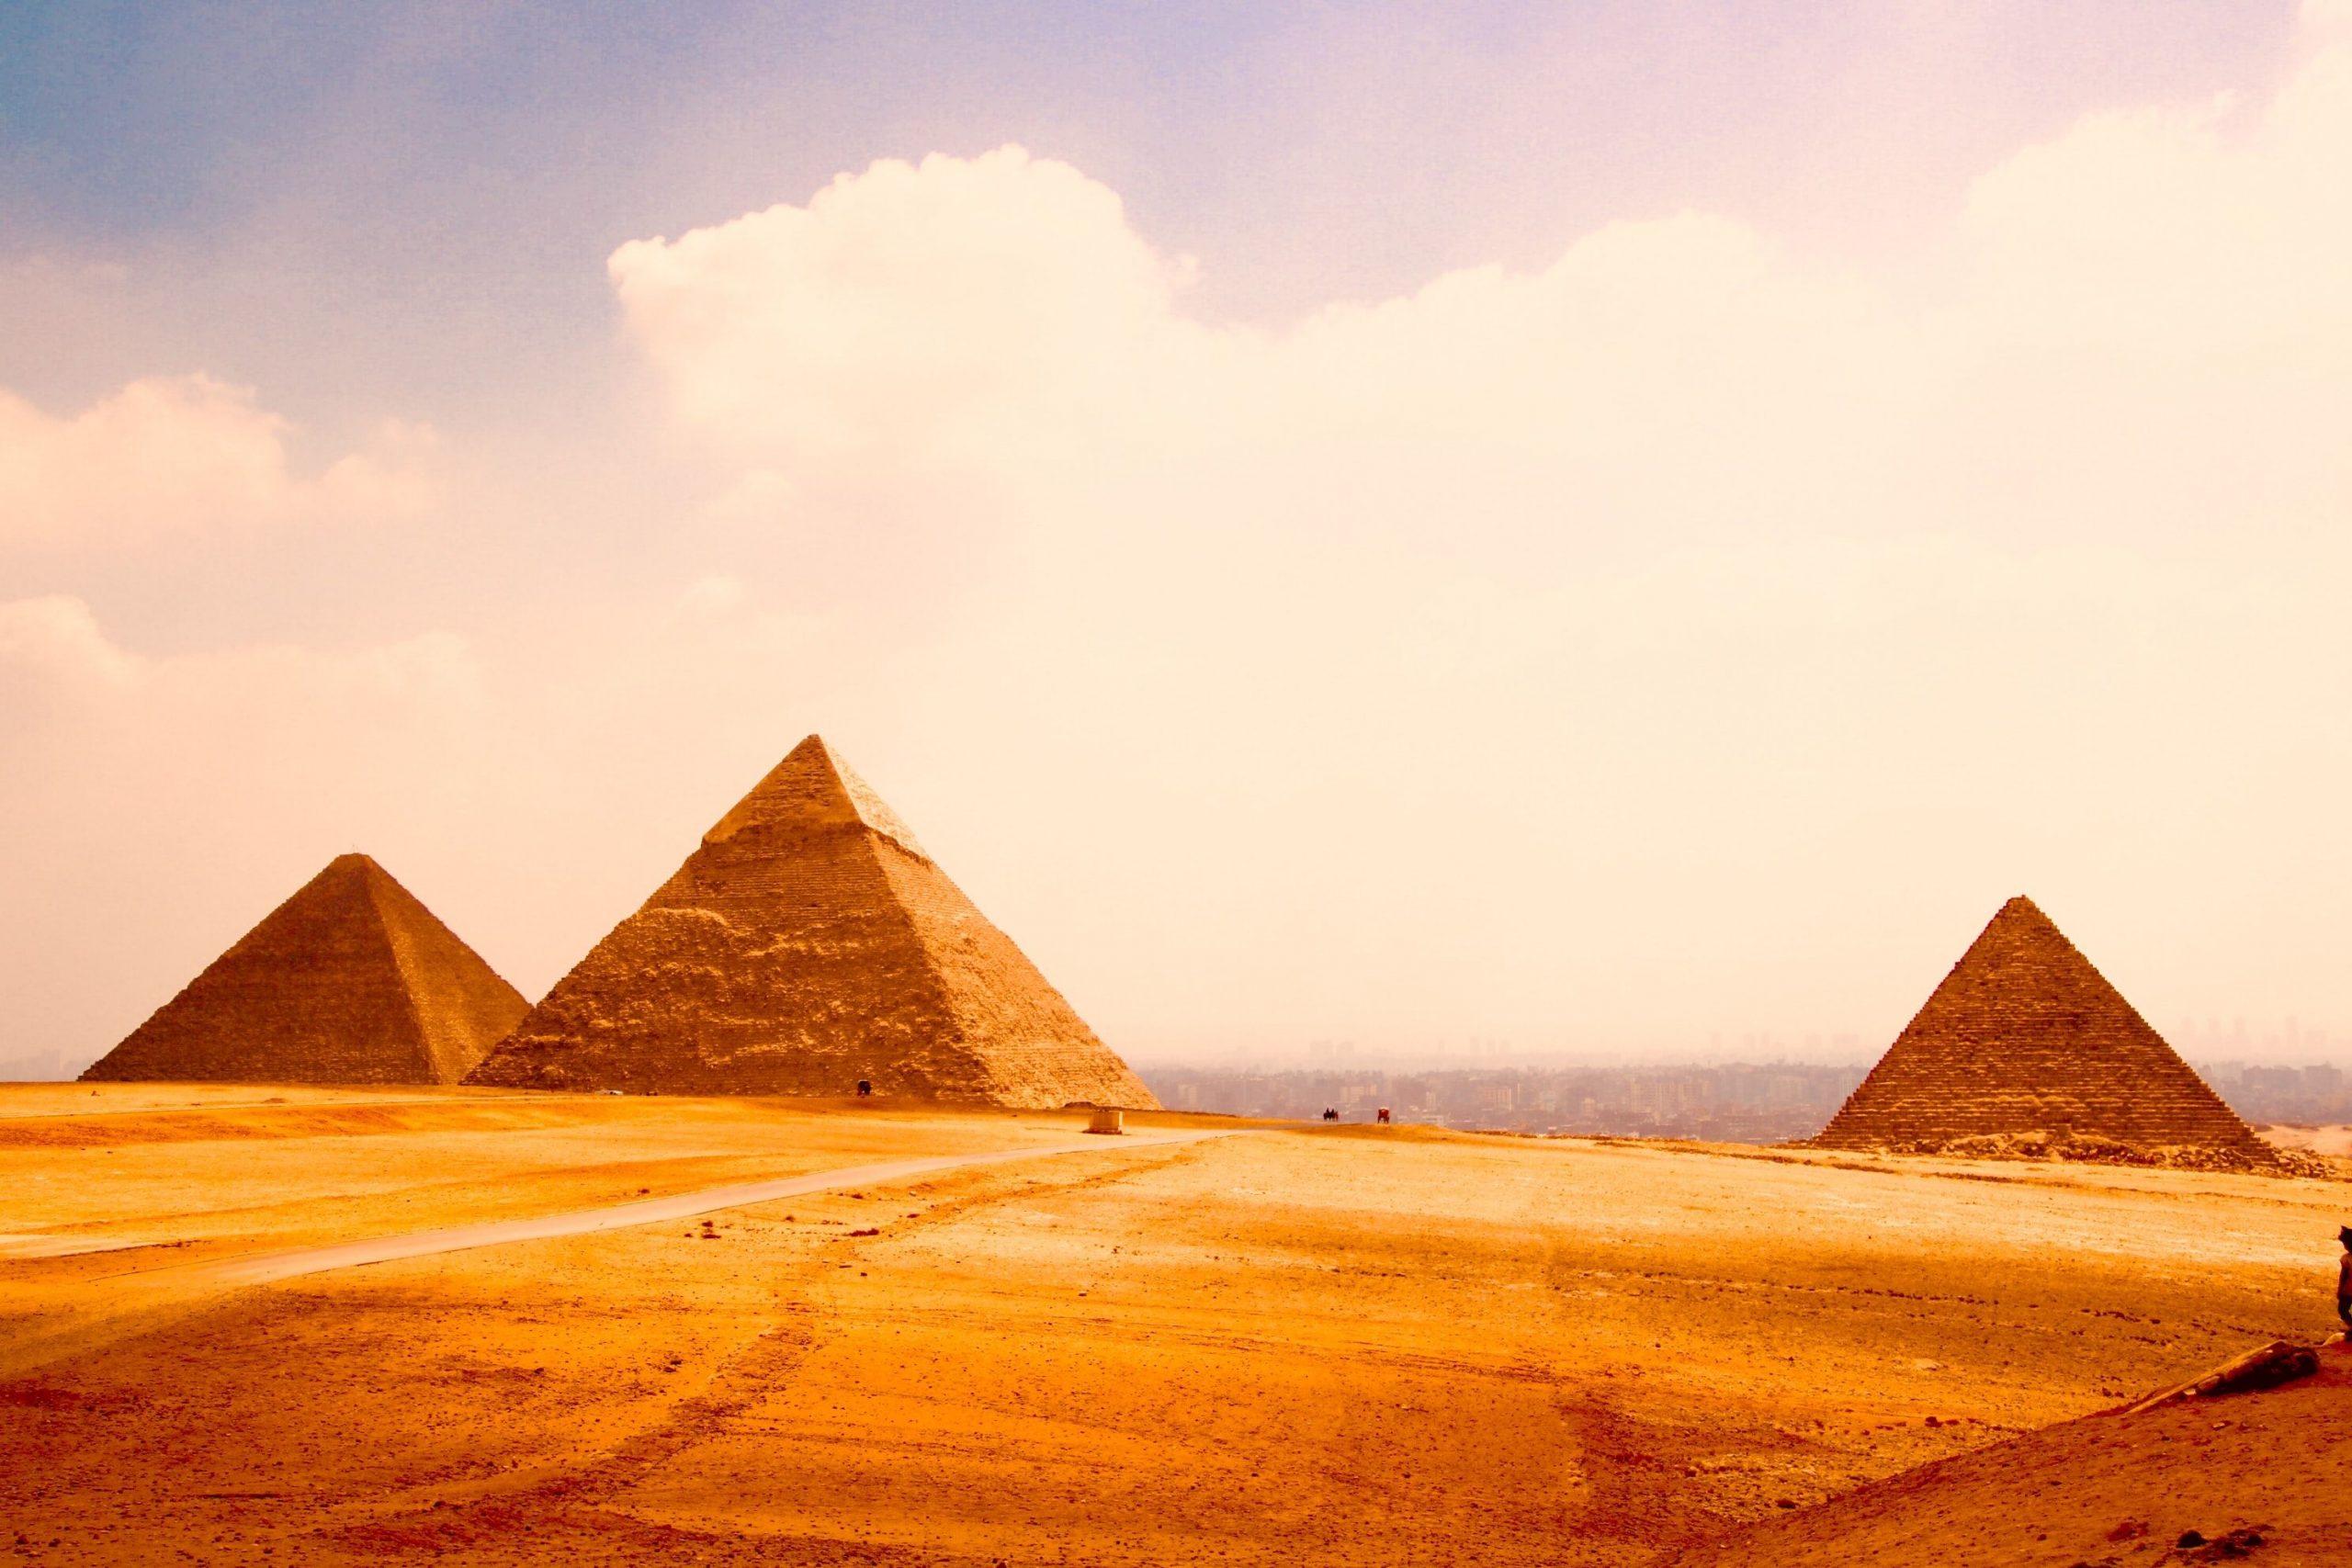 YouTuber faces action for hosting gender reveal party at Pyramids of Giza